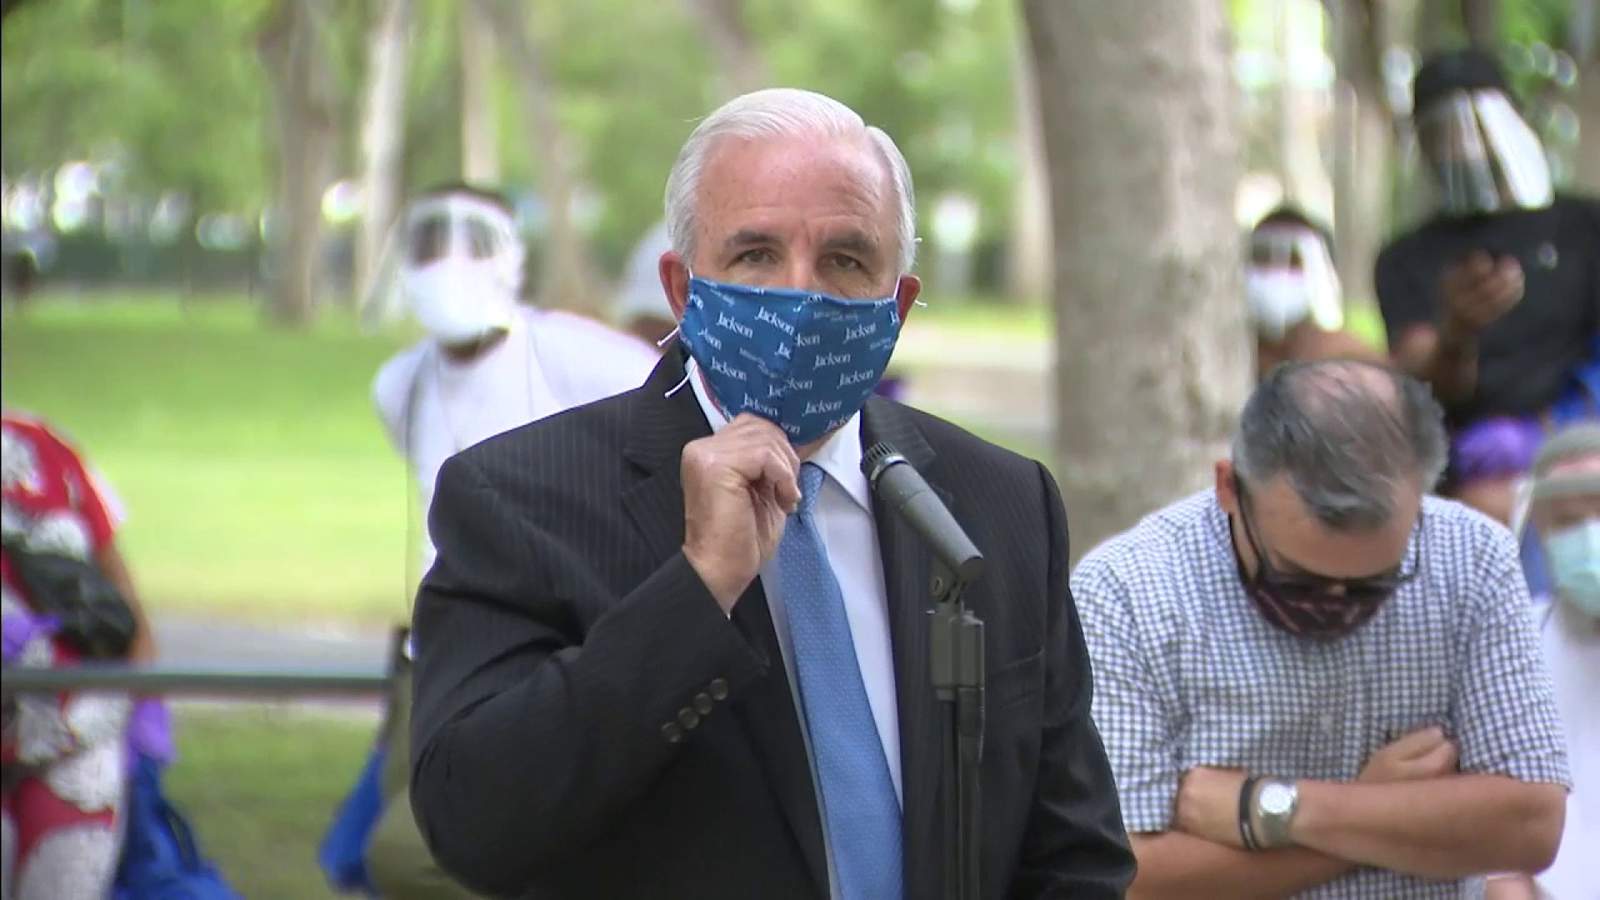 Masks are the key to keeping Miami-Dade businesses open, mayor says